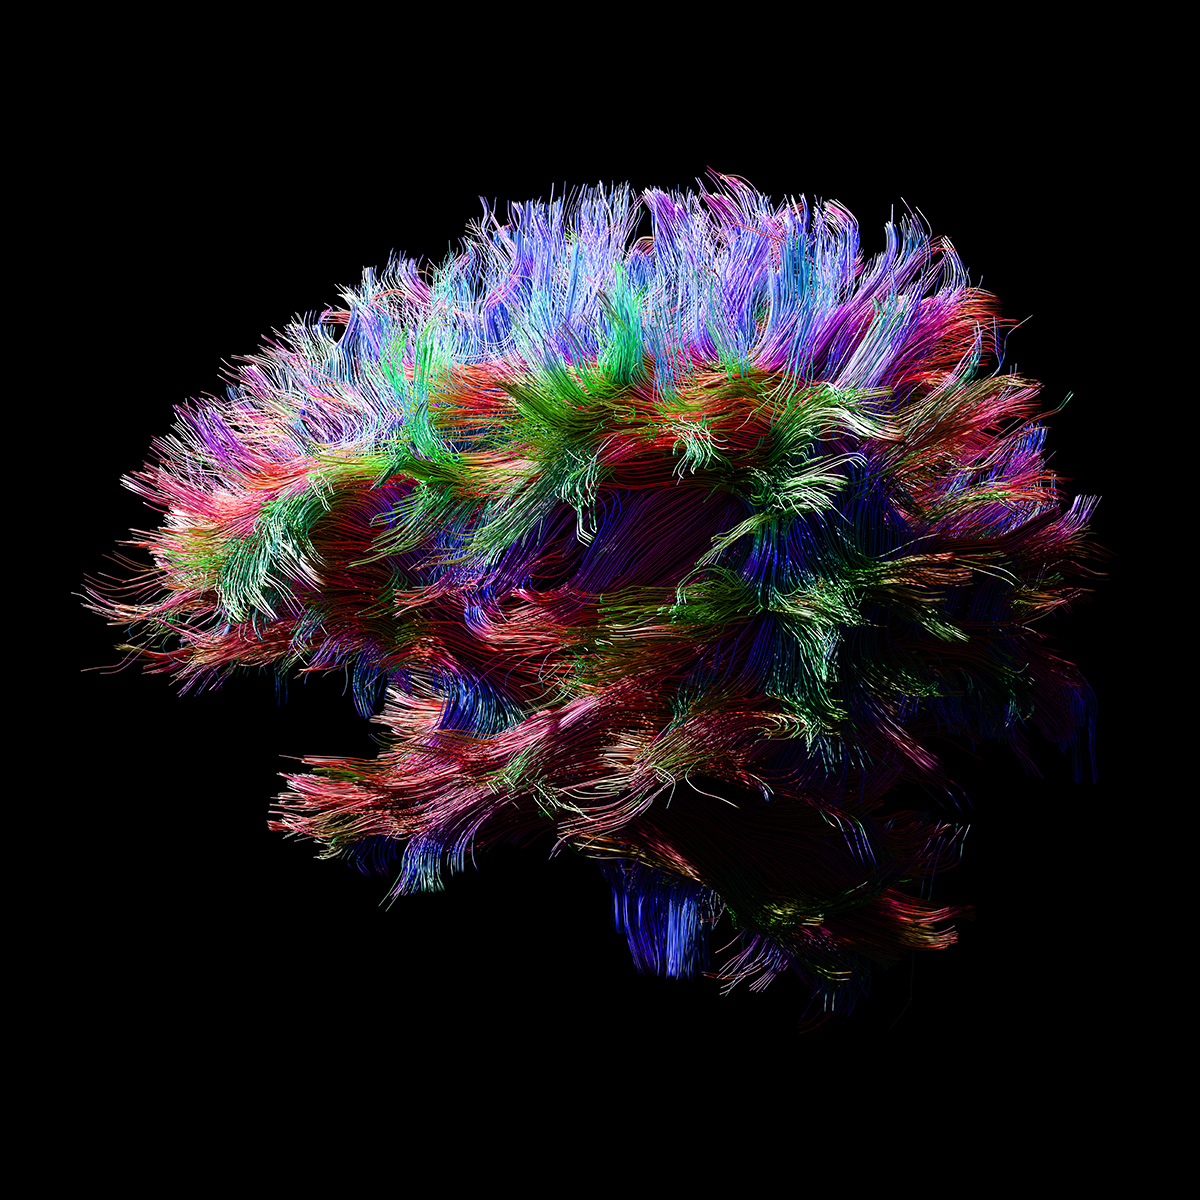 The Synapse visualization